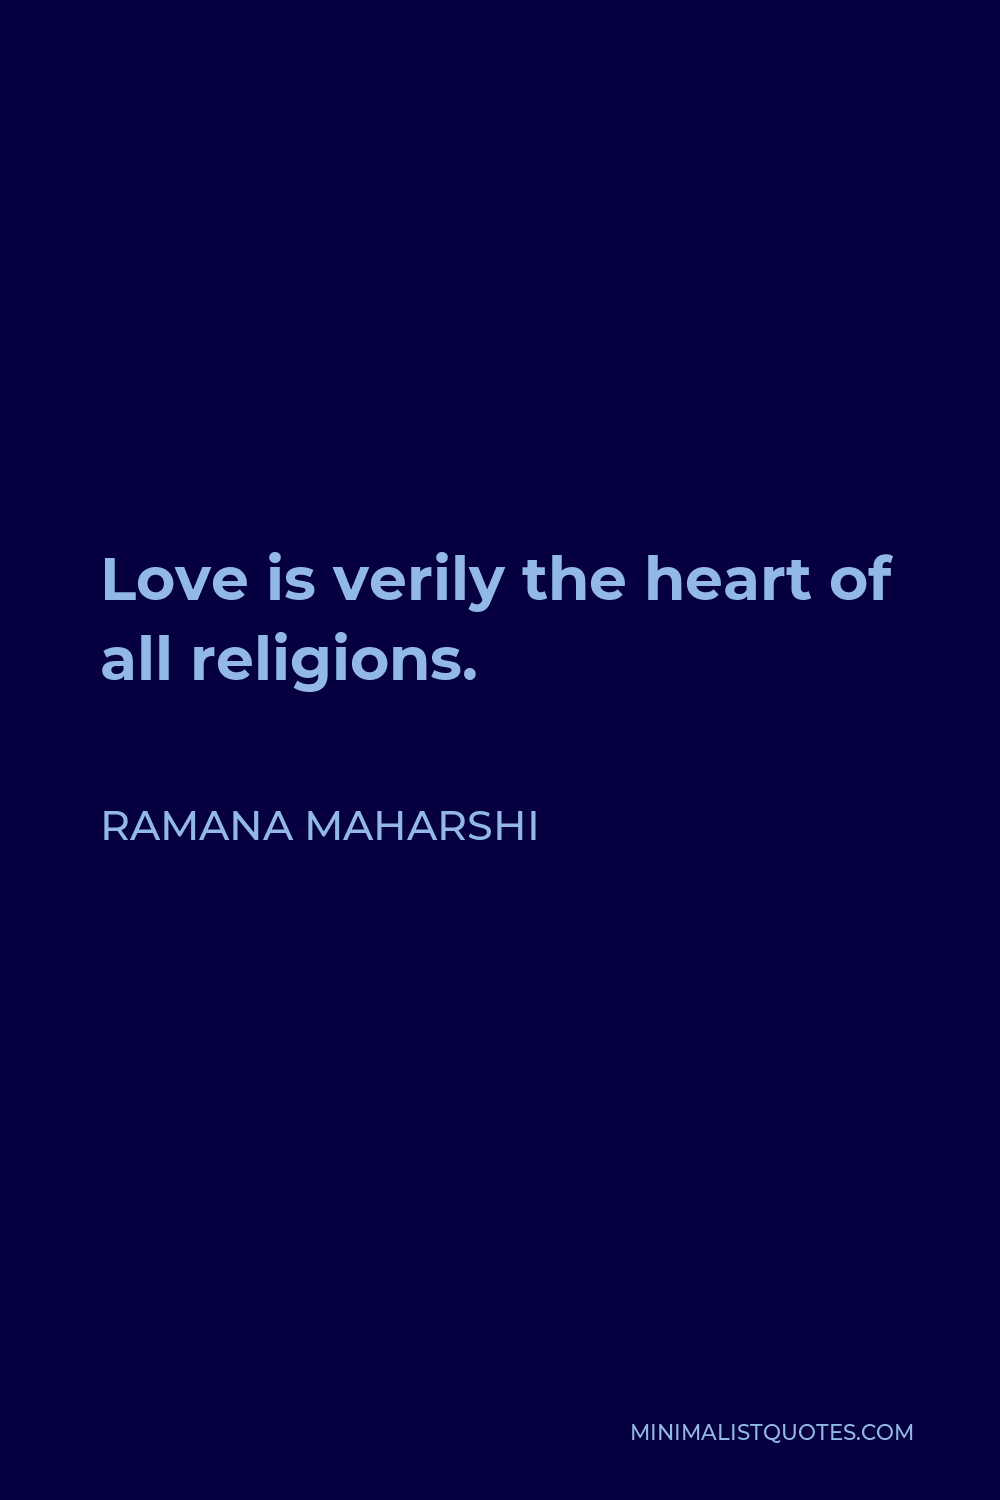 Ramana Maharshi Quote - Love is verily the heart of all religions.